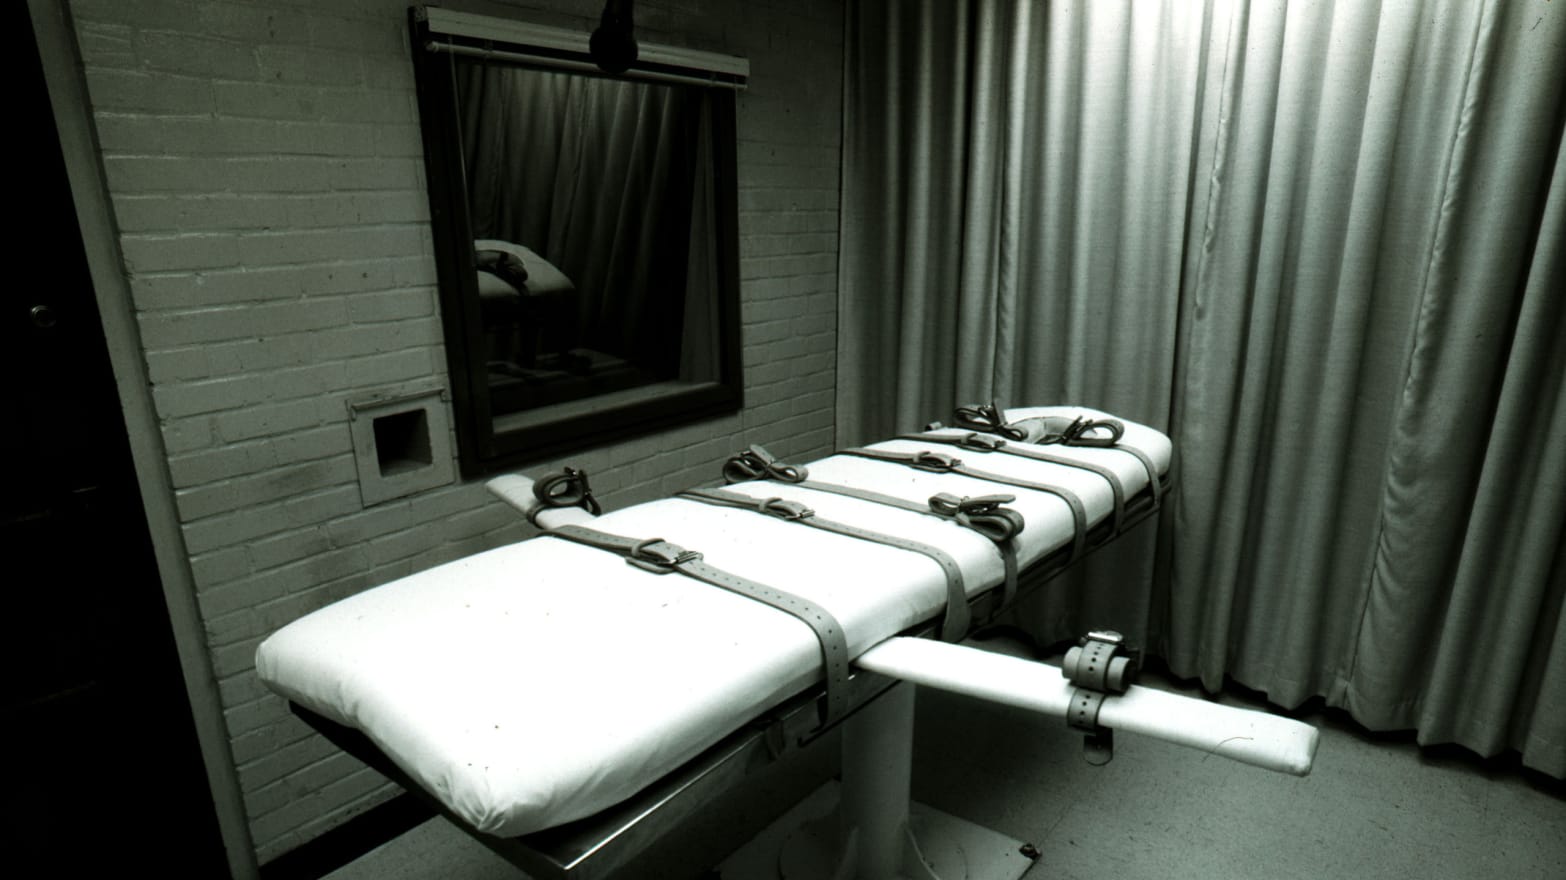 Lethal Injection Leads To The Most Botched Executions